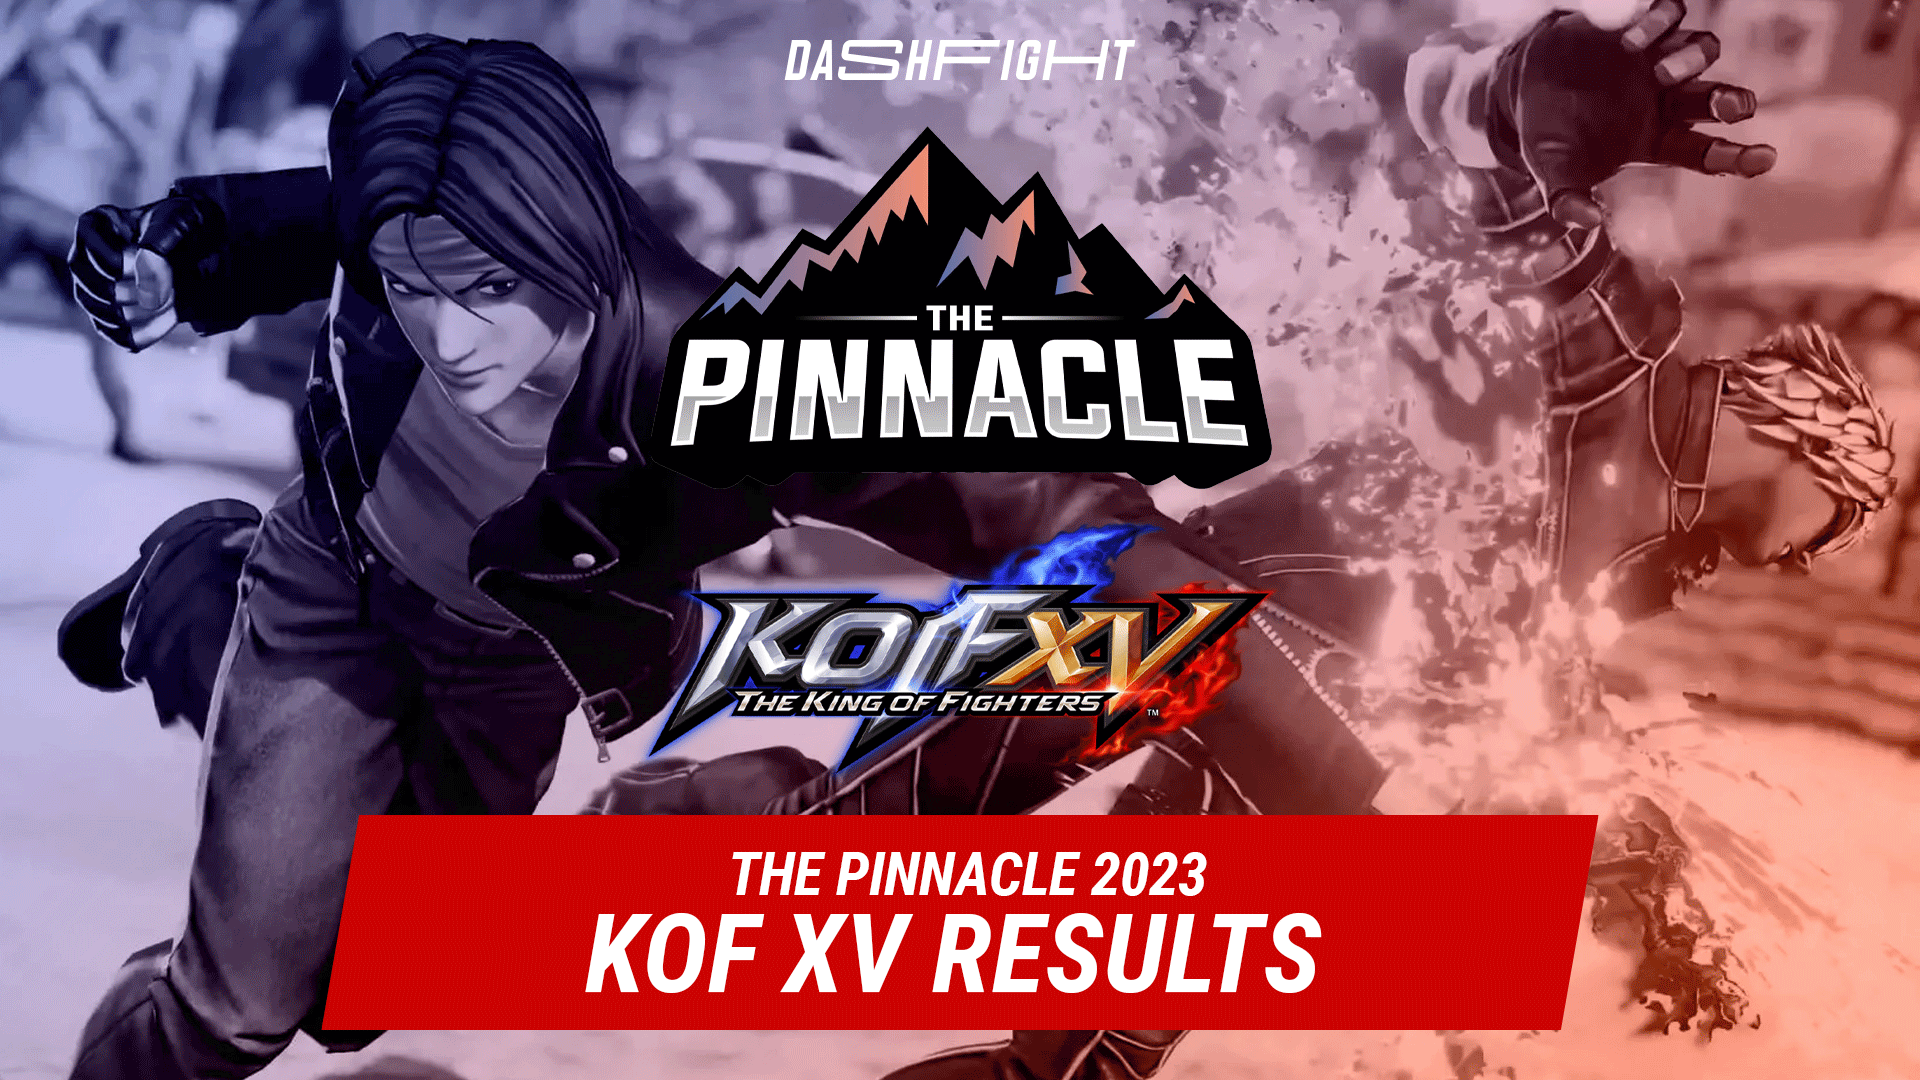 Pinnacle 2023 The King of Fighters XV Results